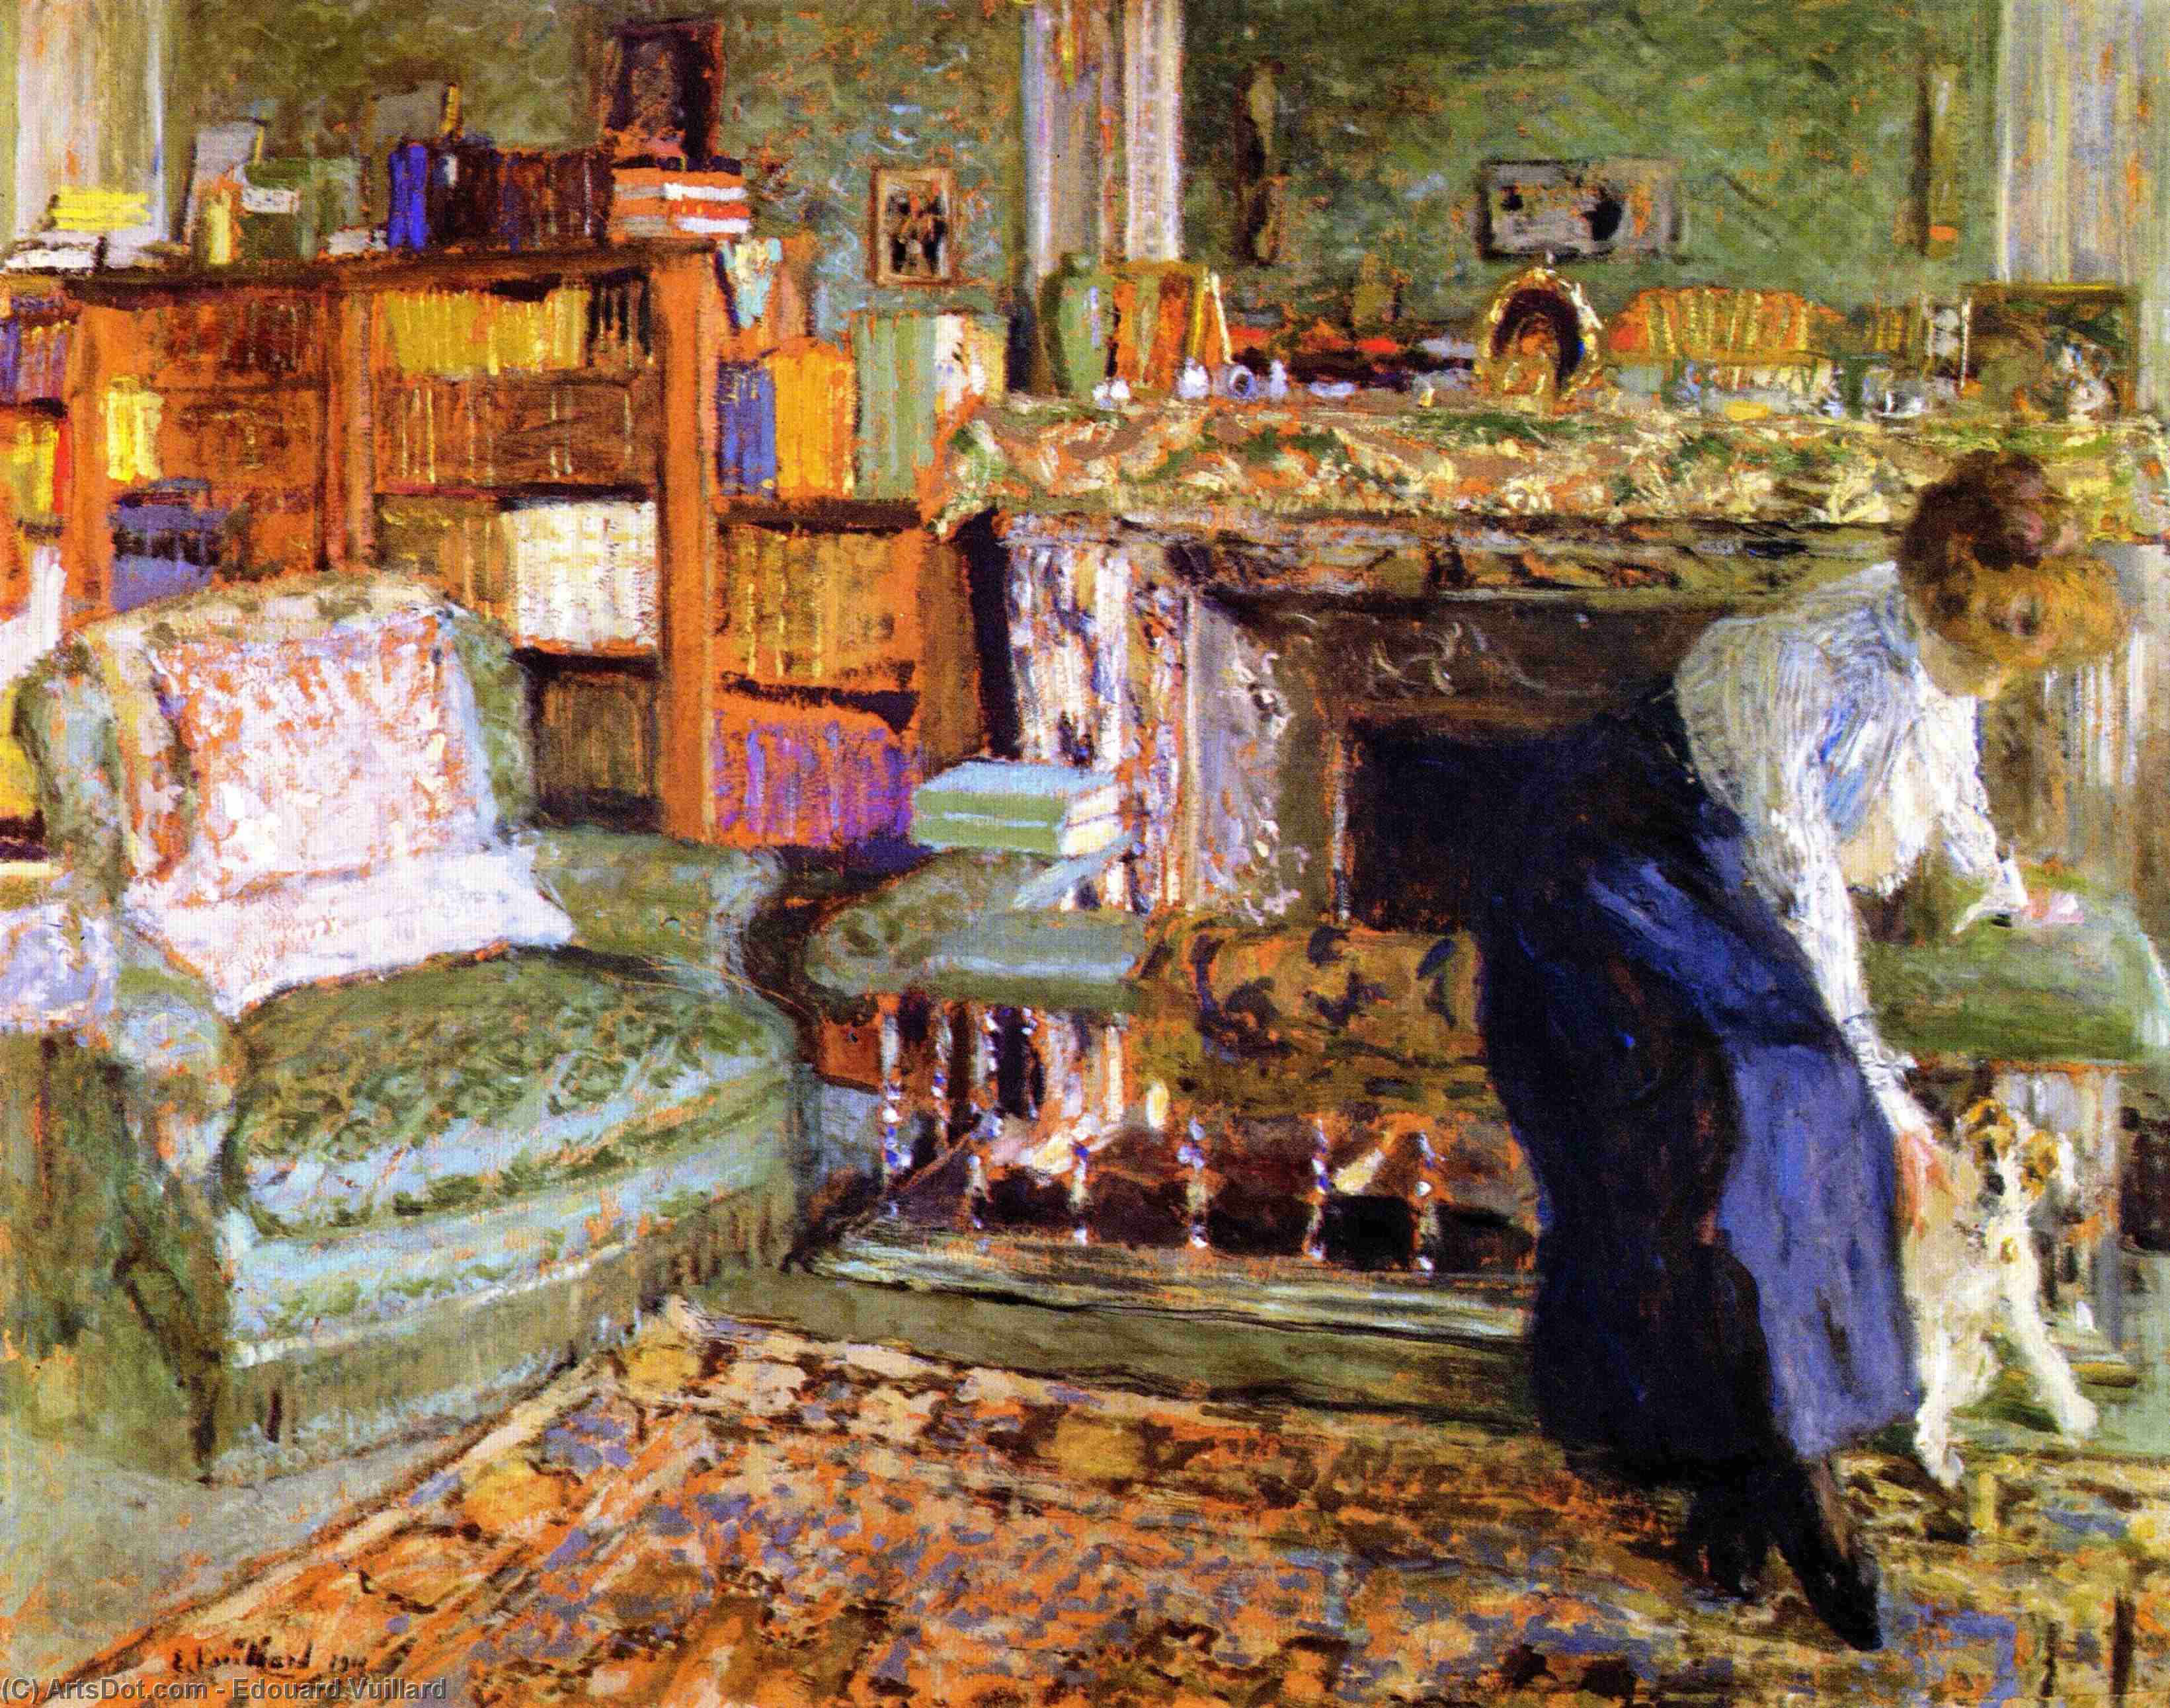 Order Paintings Reproductions Miss Marguerite Chapin with Her Fox-Terrier, 1910 by Jean Edouard Vuillard (1868-1940, France) | ArtsDot.com